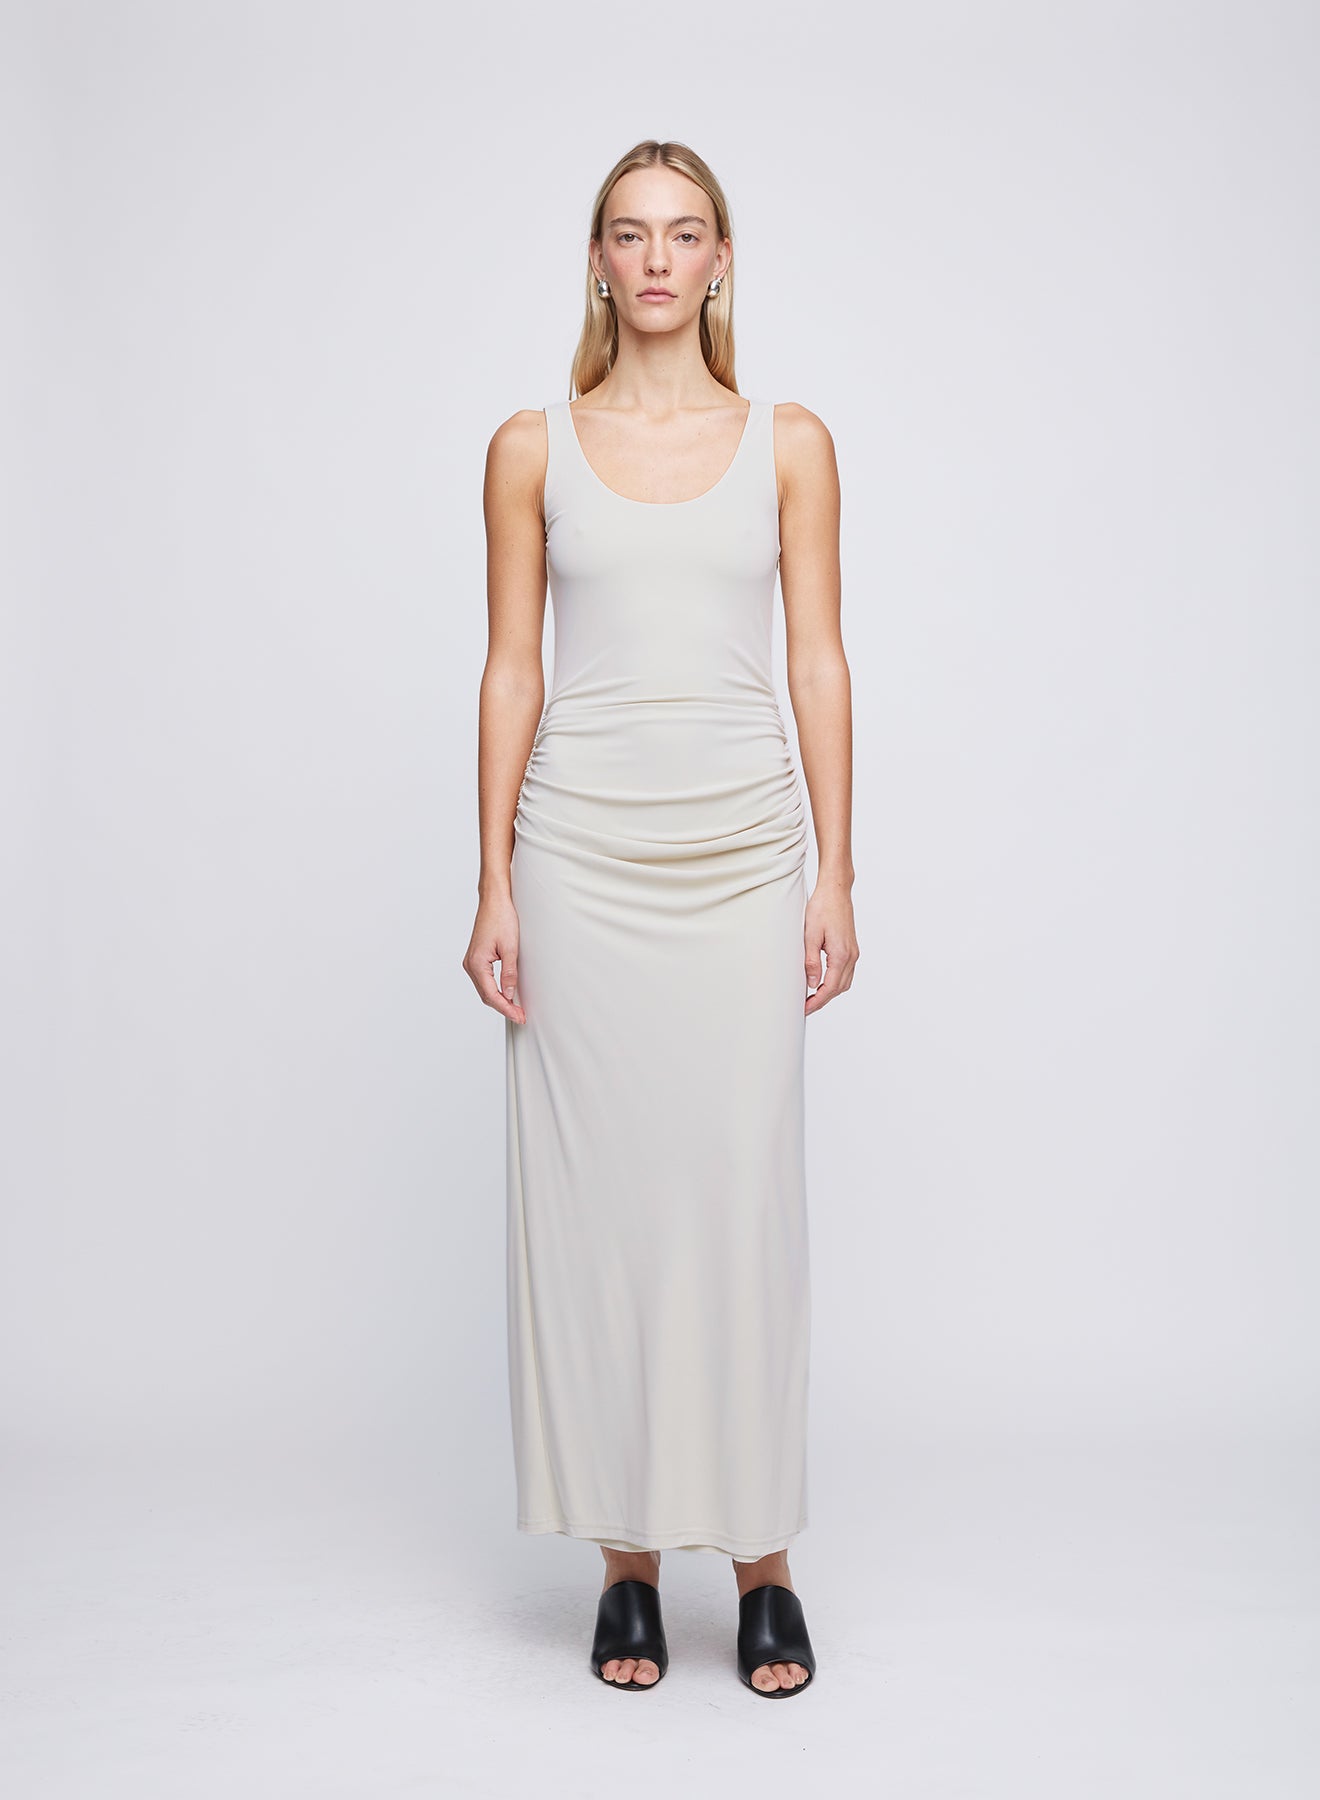 The ANNA QUAN Shelley Dress in Dove is designed in a jersey stretch material with a scoop neckline and subtle draping across the body for a flattering silhouette.